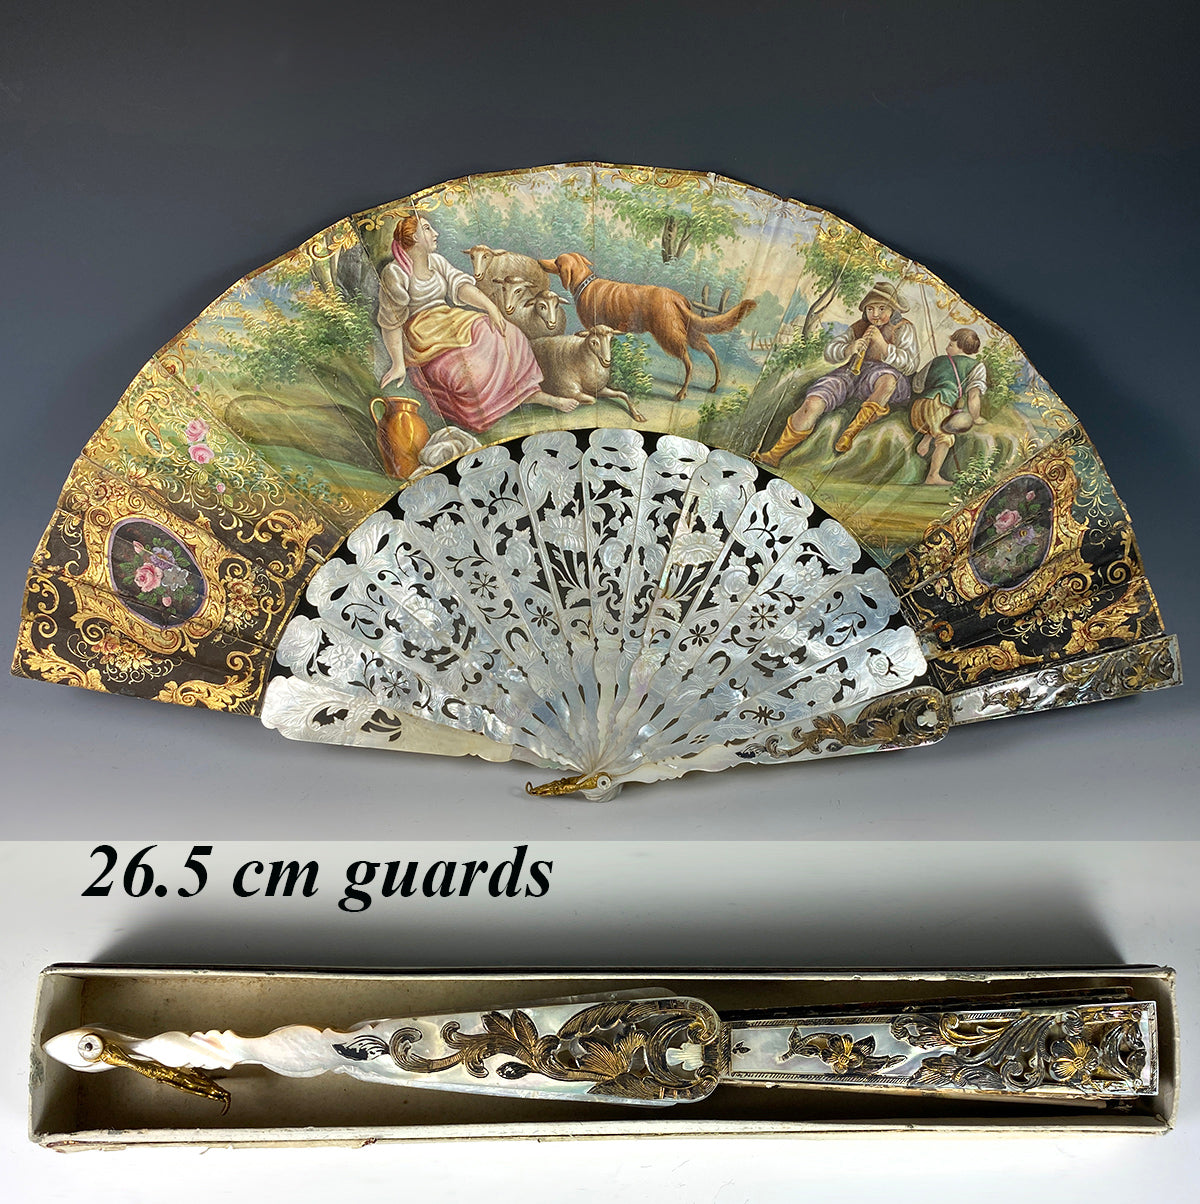 Fine Antique French Hand Painted Hand Fan, 26cm Carved Mother of Pearl Guards, Sticks, c.1840-50